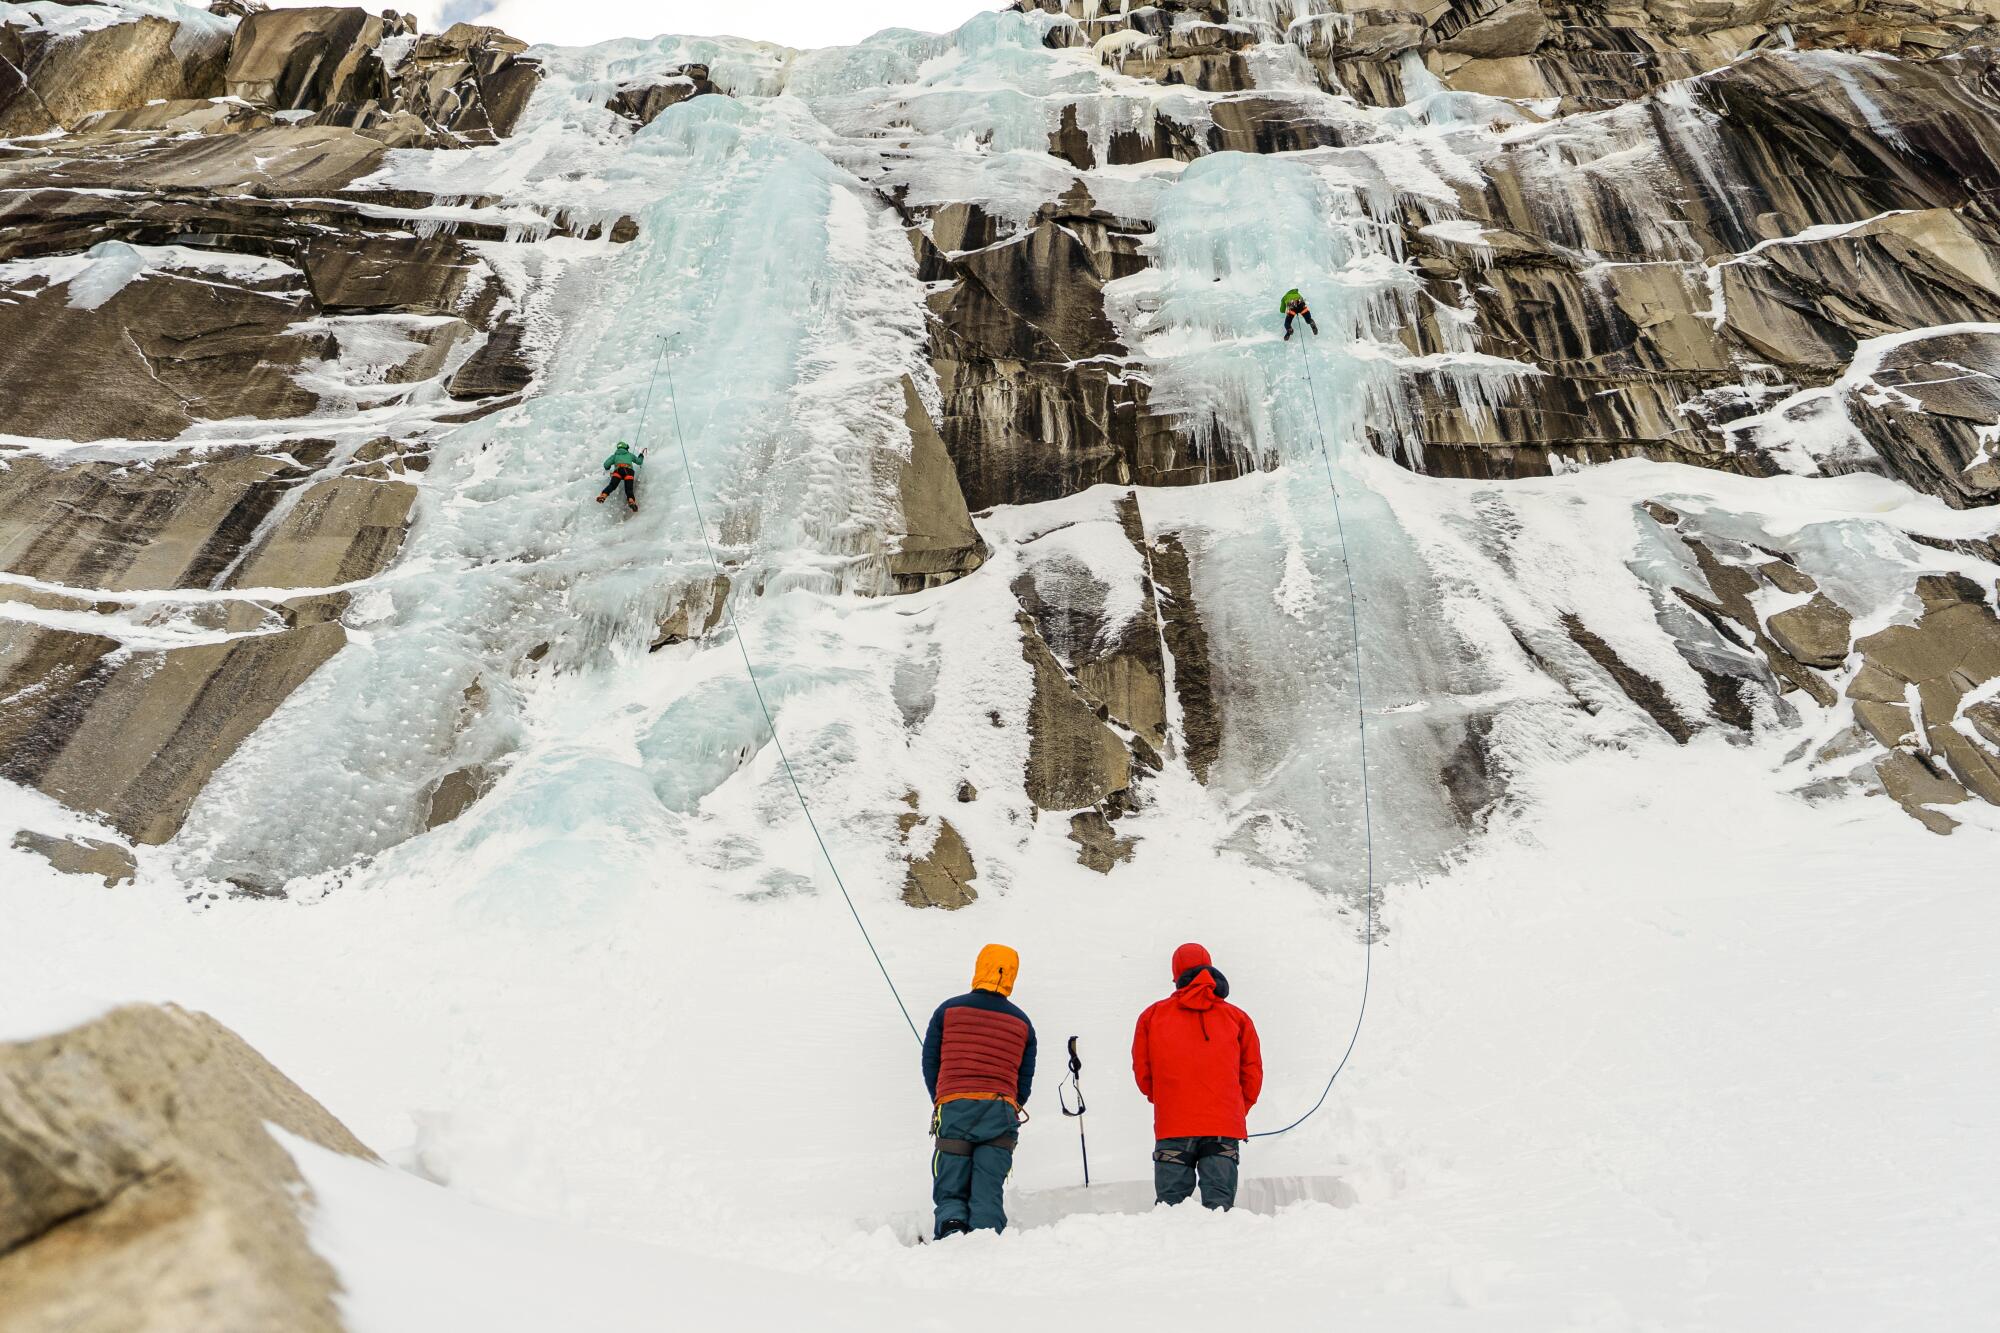 Climbers scale the ice falls at Lee Vining Canyon, about 30 miles north of Mammoth (Richard Bae / For The Times)